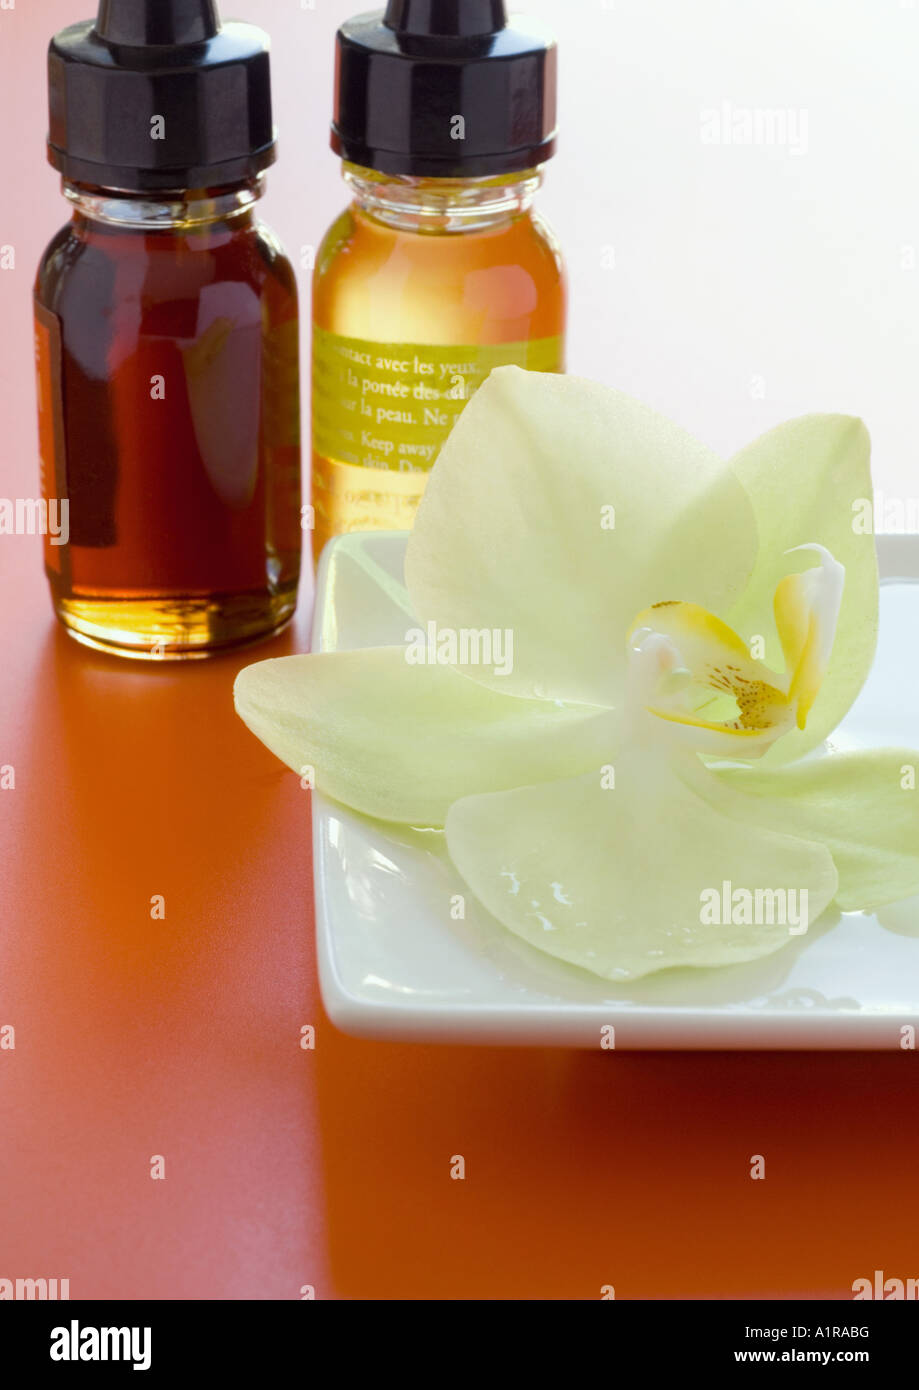 Bottles of scented oils and orchid blossom Stock Photo